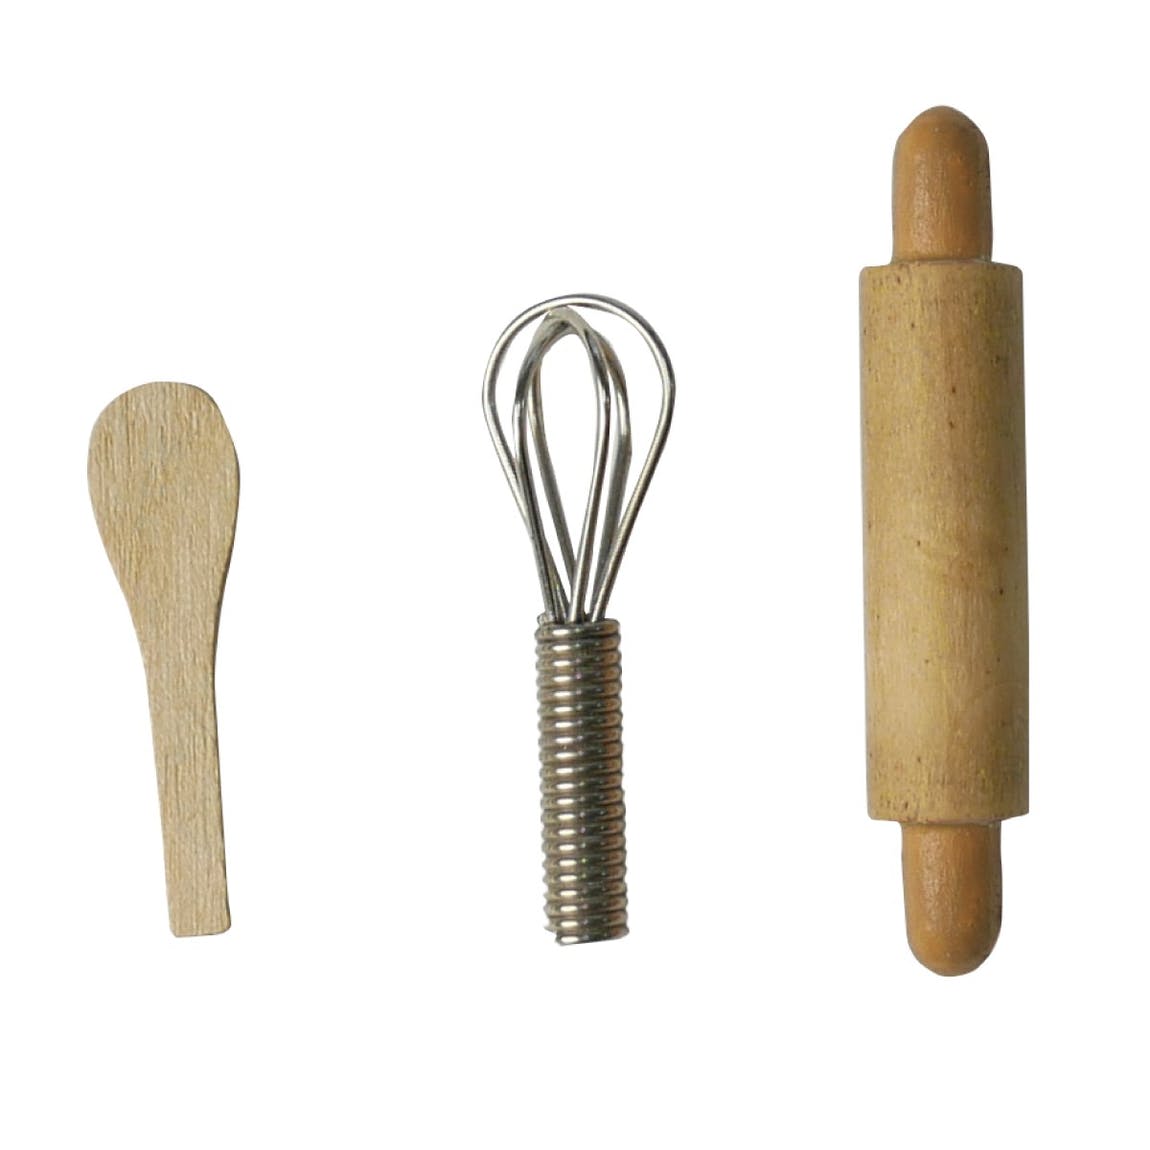 MINIS - KITCHEN UTENSILS for The Mouse Mansion